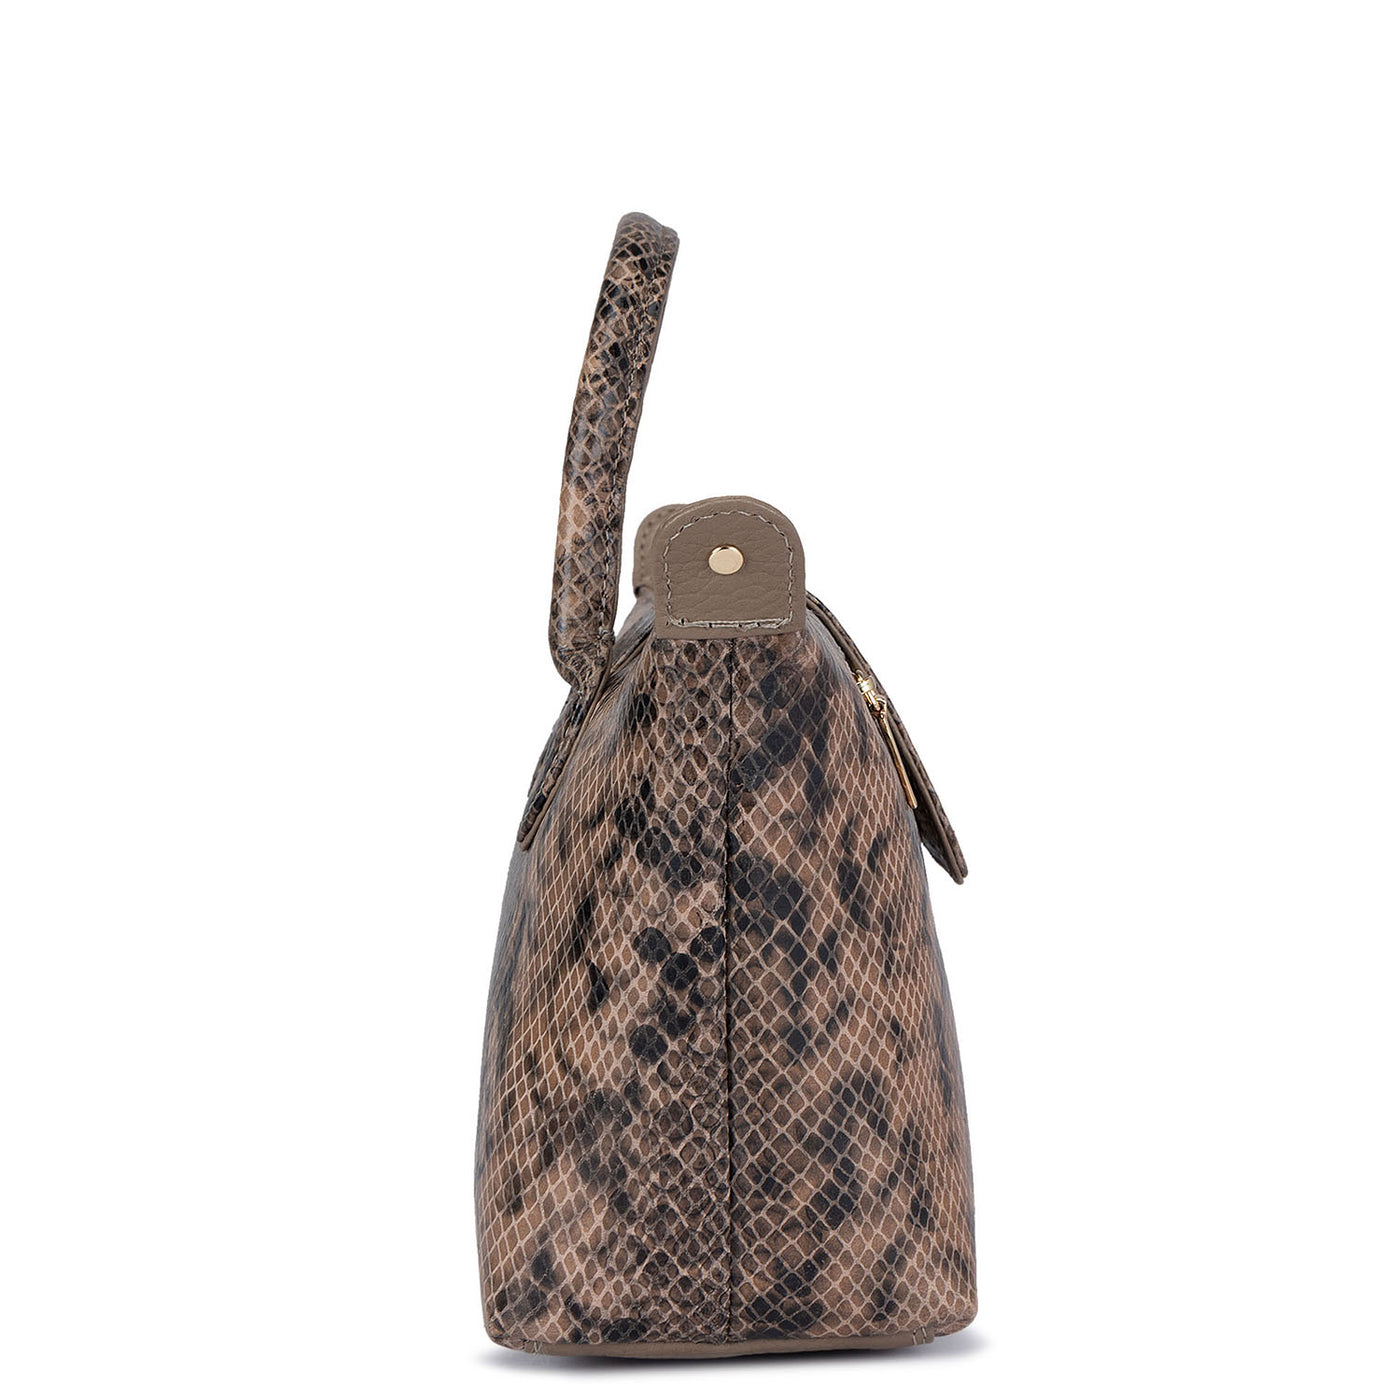 Snake Leather Vanity Pouch - Taupe